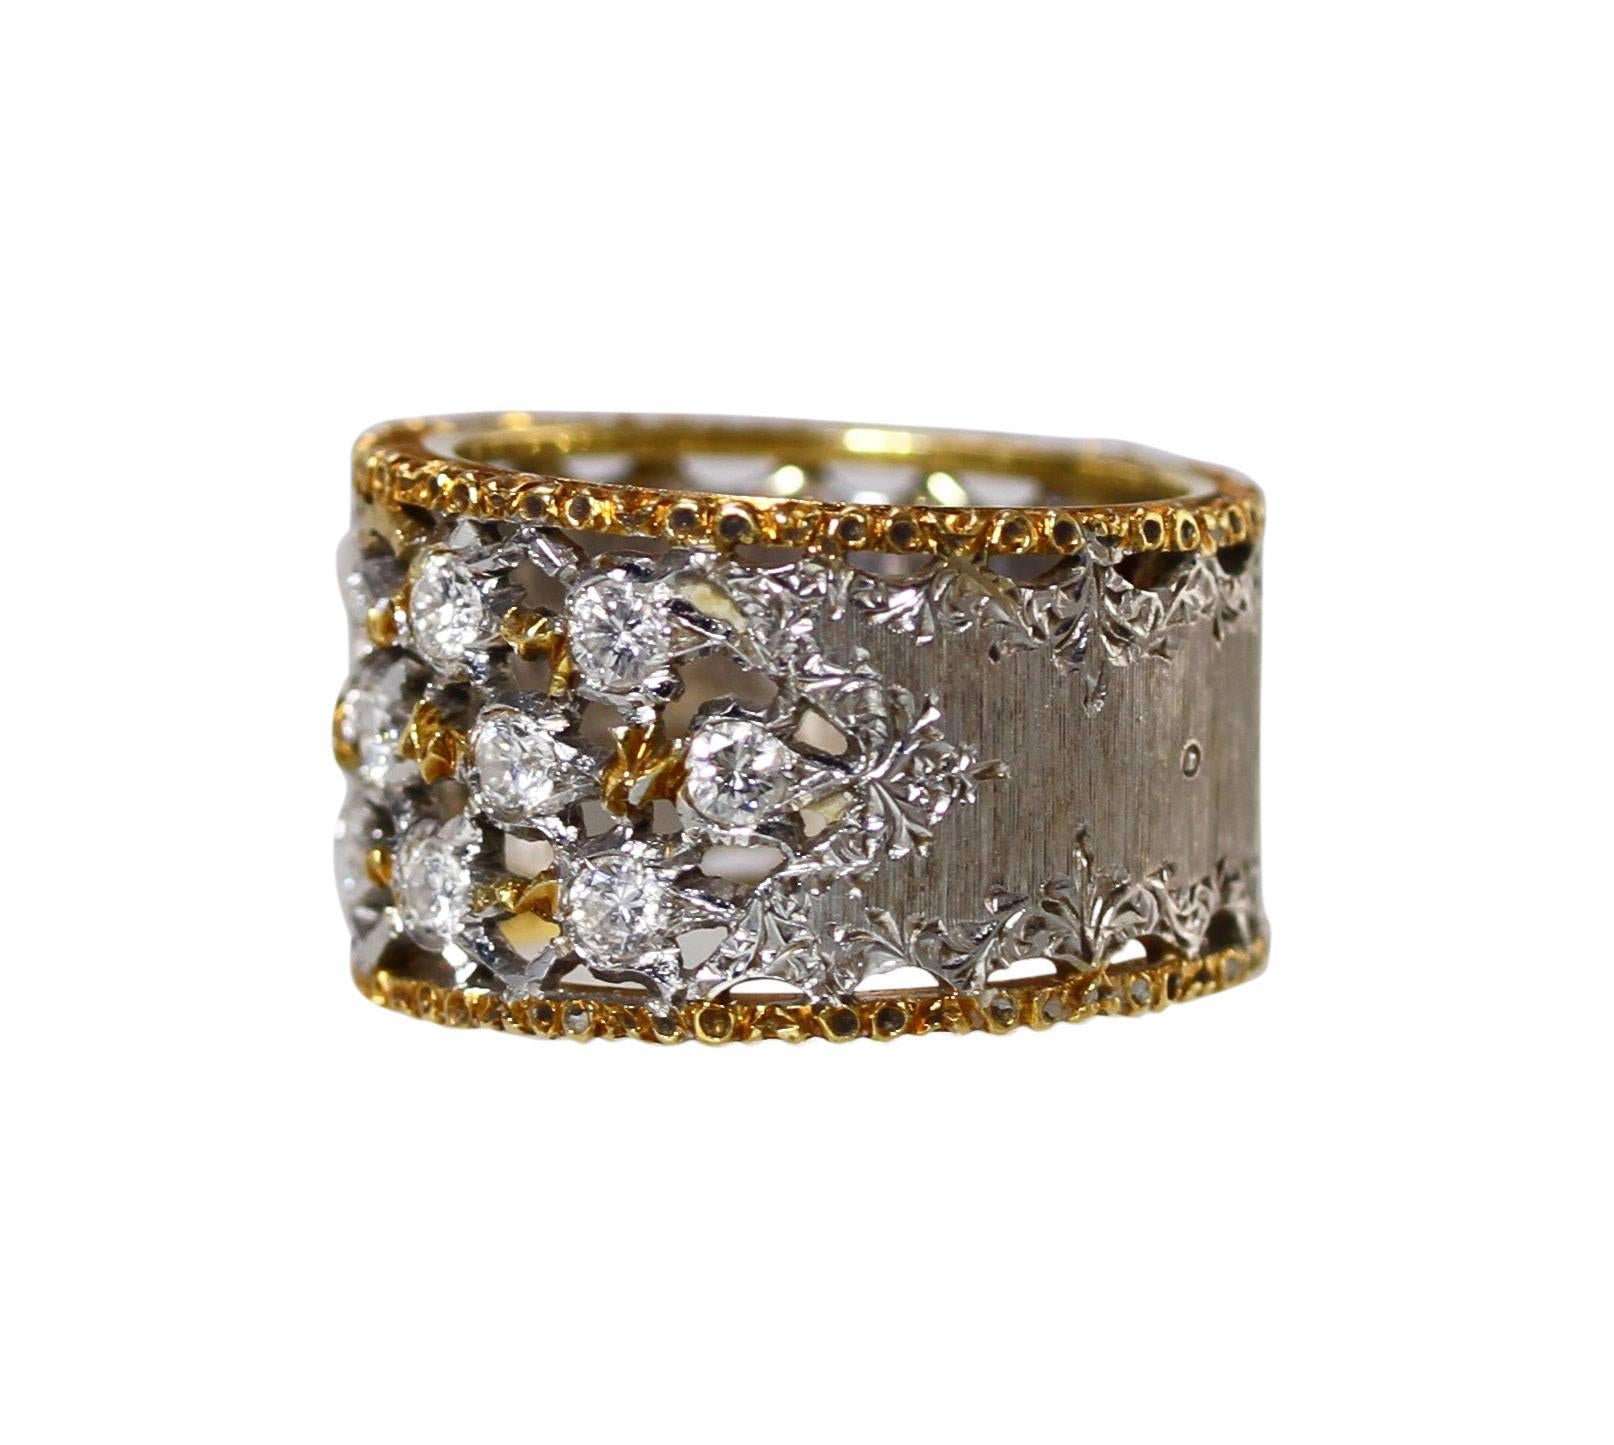 An 18 karat white and yellow gold and diamond ring by Buccellati, Italy, the slightly tapered band with an openwork section at the front set with 13 round diamonds weighing approximately 0.75 carat, measuring 3/4 by 3/4 inch, tapering in width from